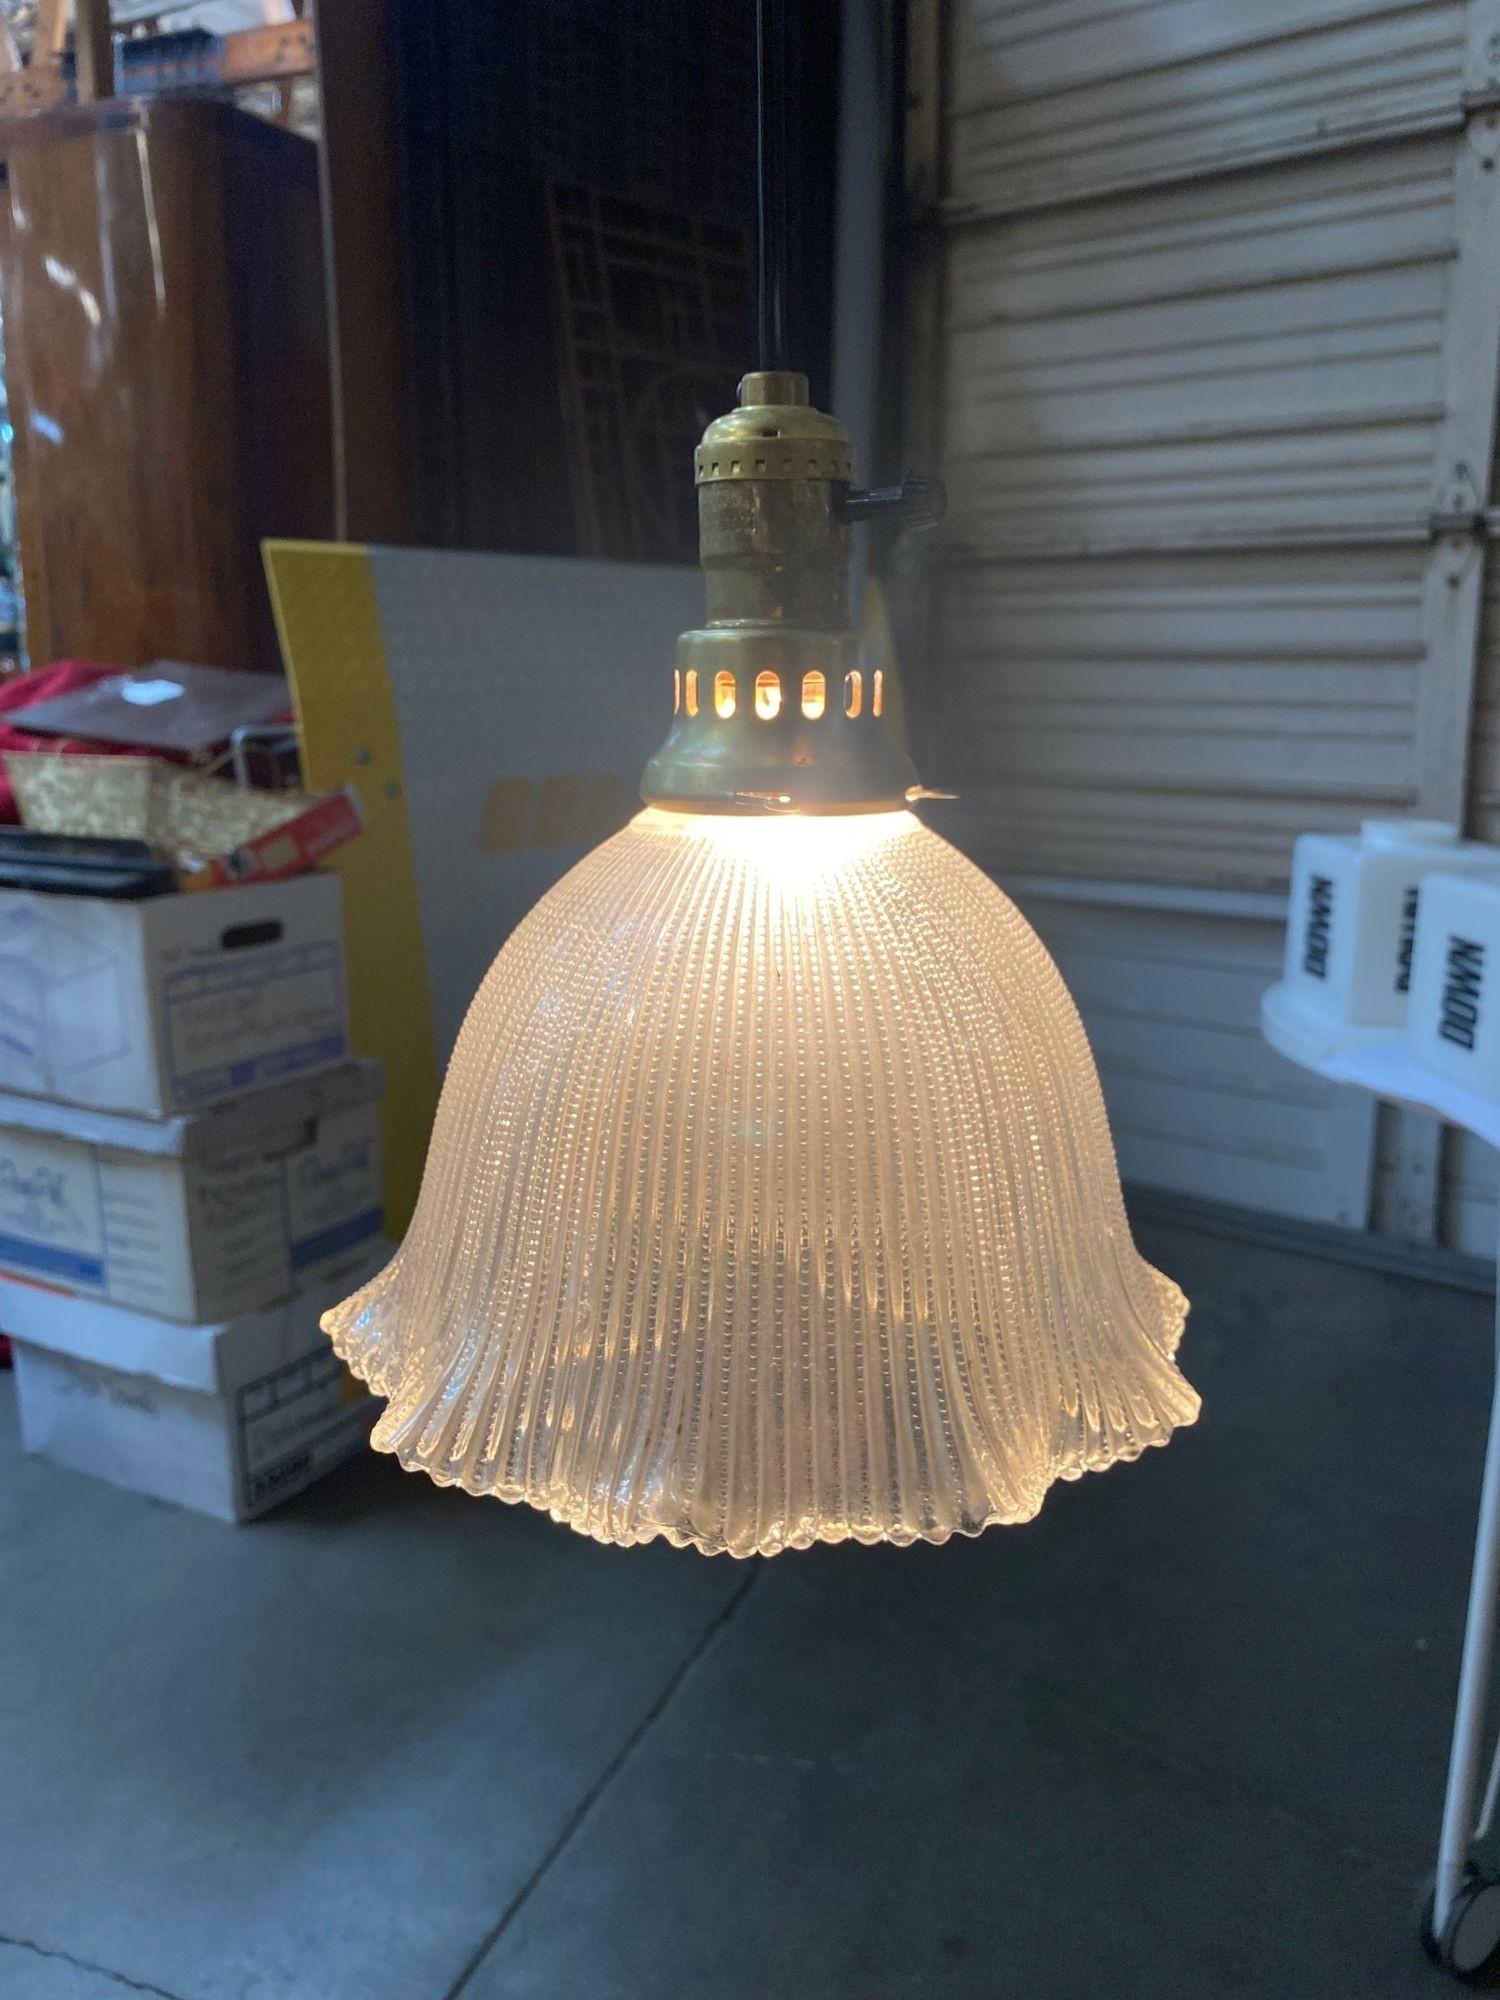 Bell Holophane Glass Shade with Brass Hanging Ceiling Pendant Light In Excellent Condition For Sale In Van Nuys, CA